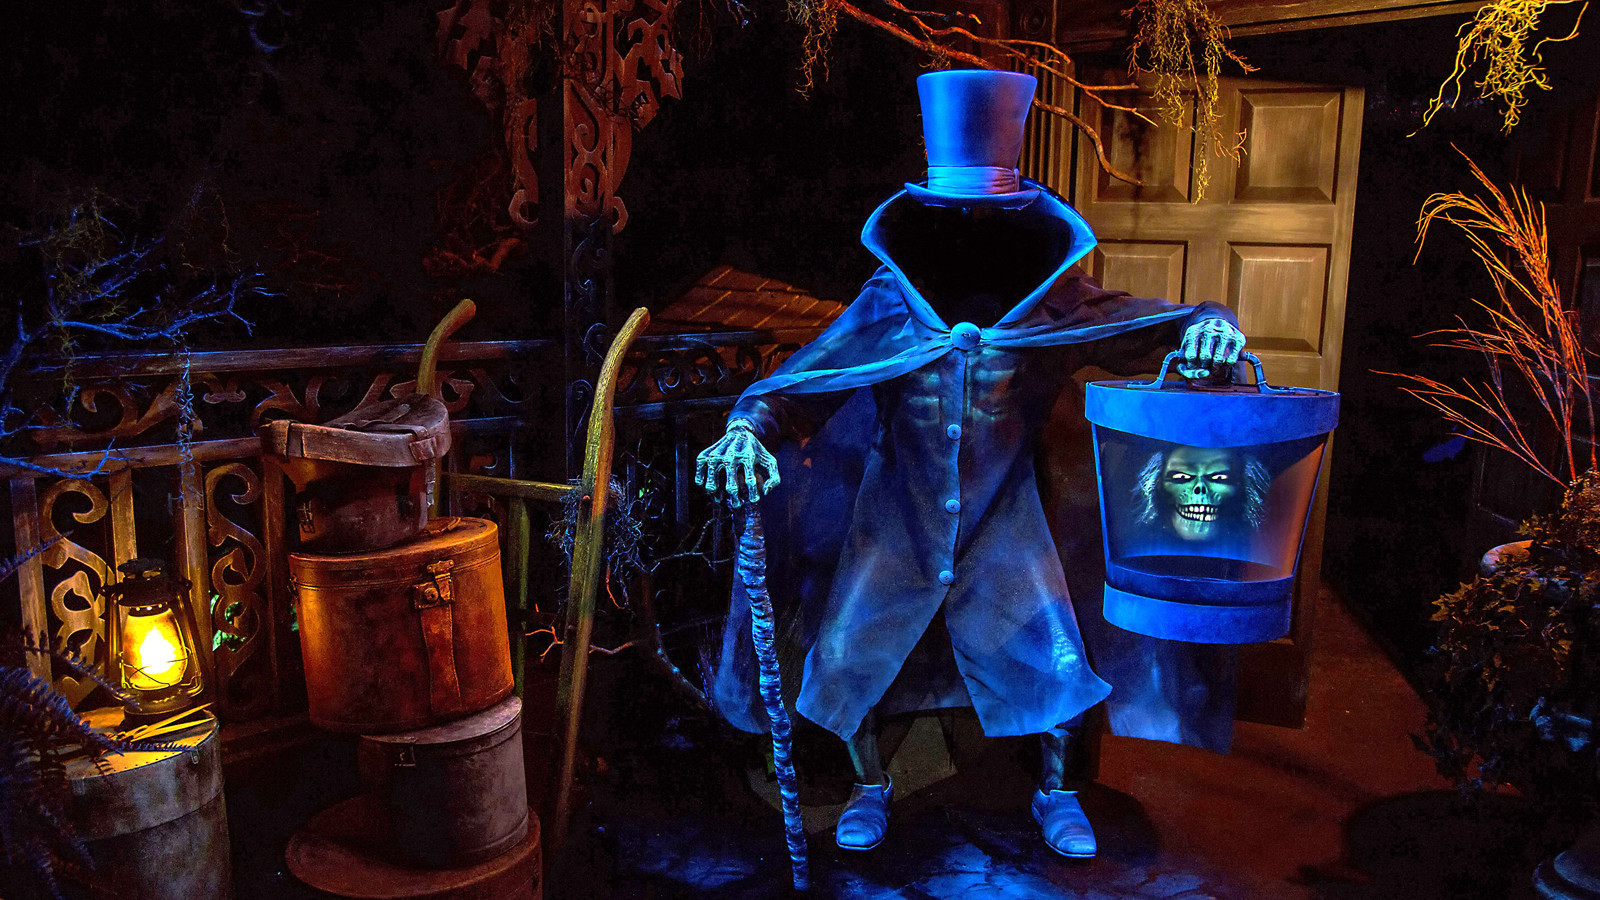 Disneyland adding new special effects to classic rides